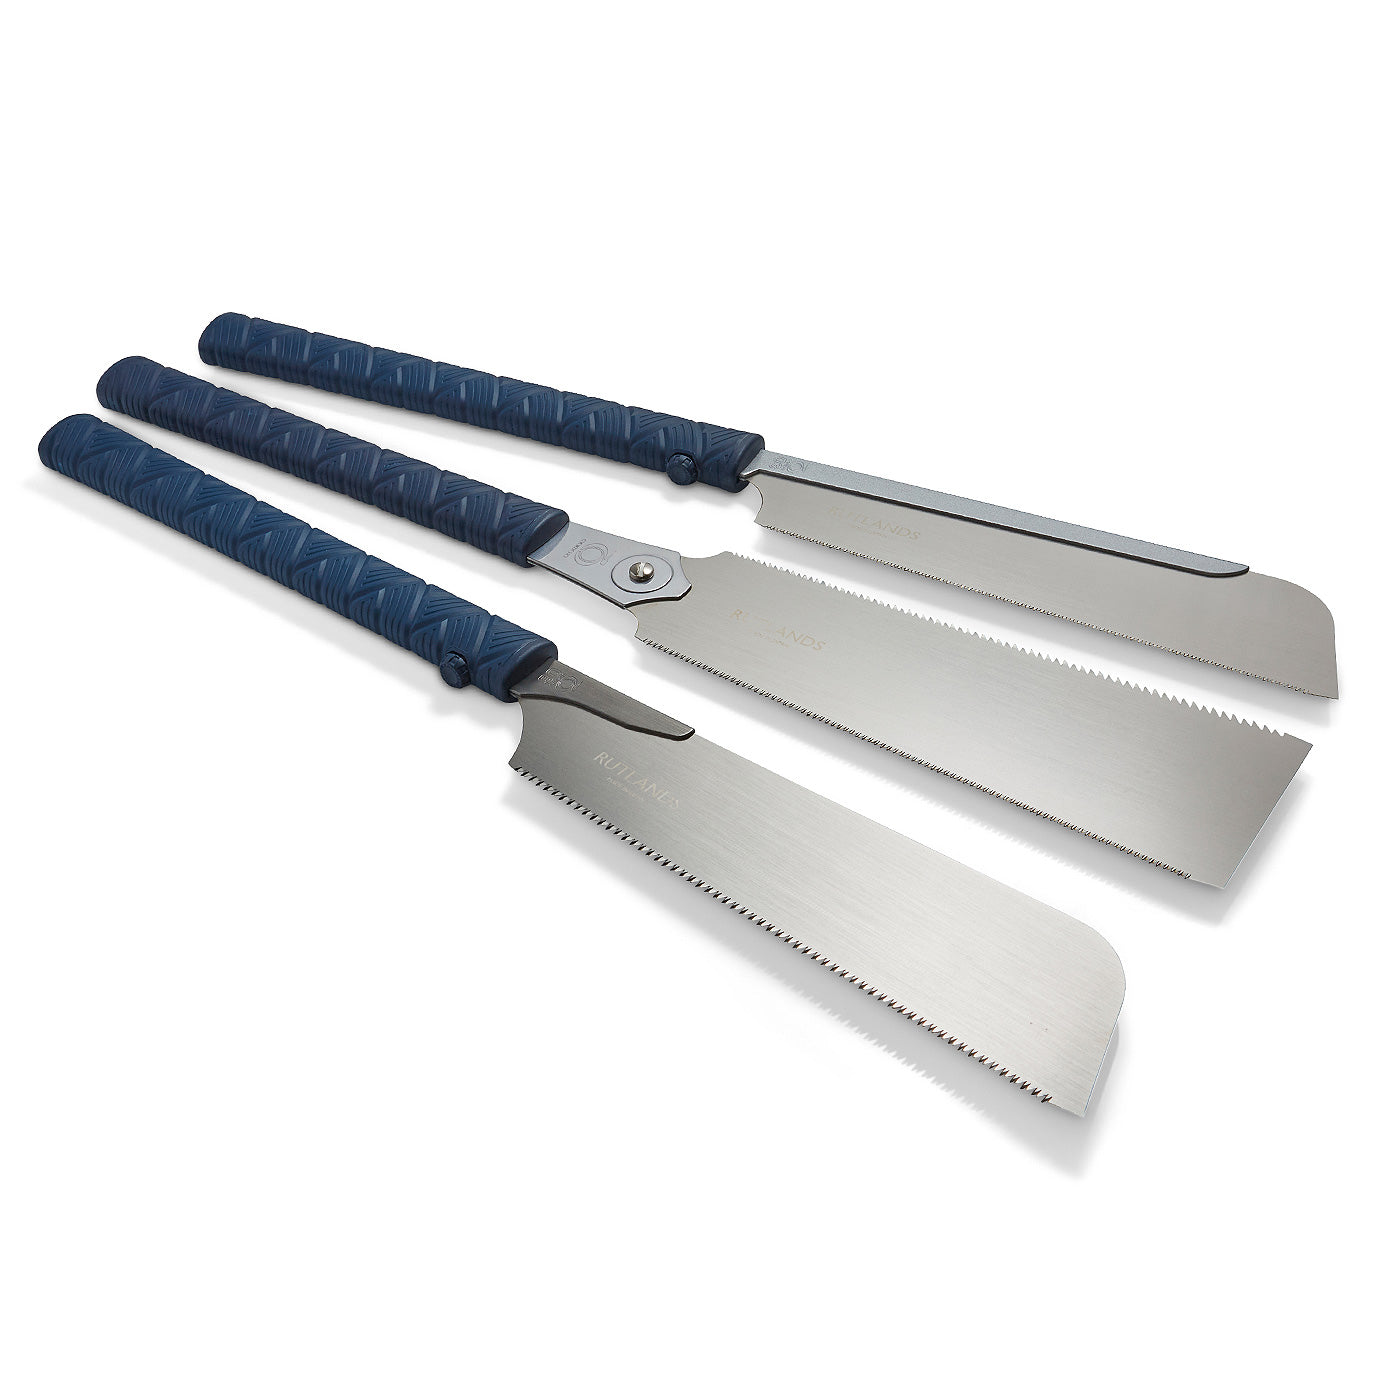 Japanese Saws - 240mm - Power Grip - Set of 3